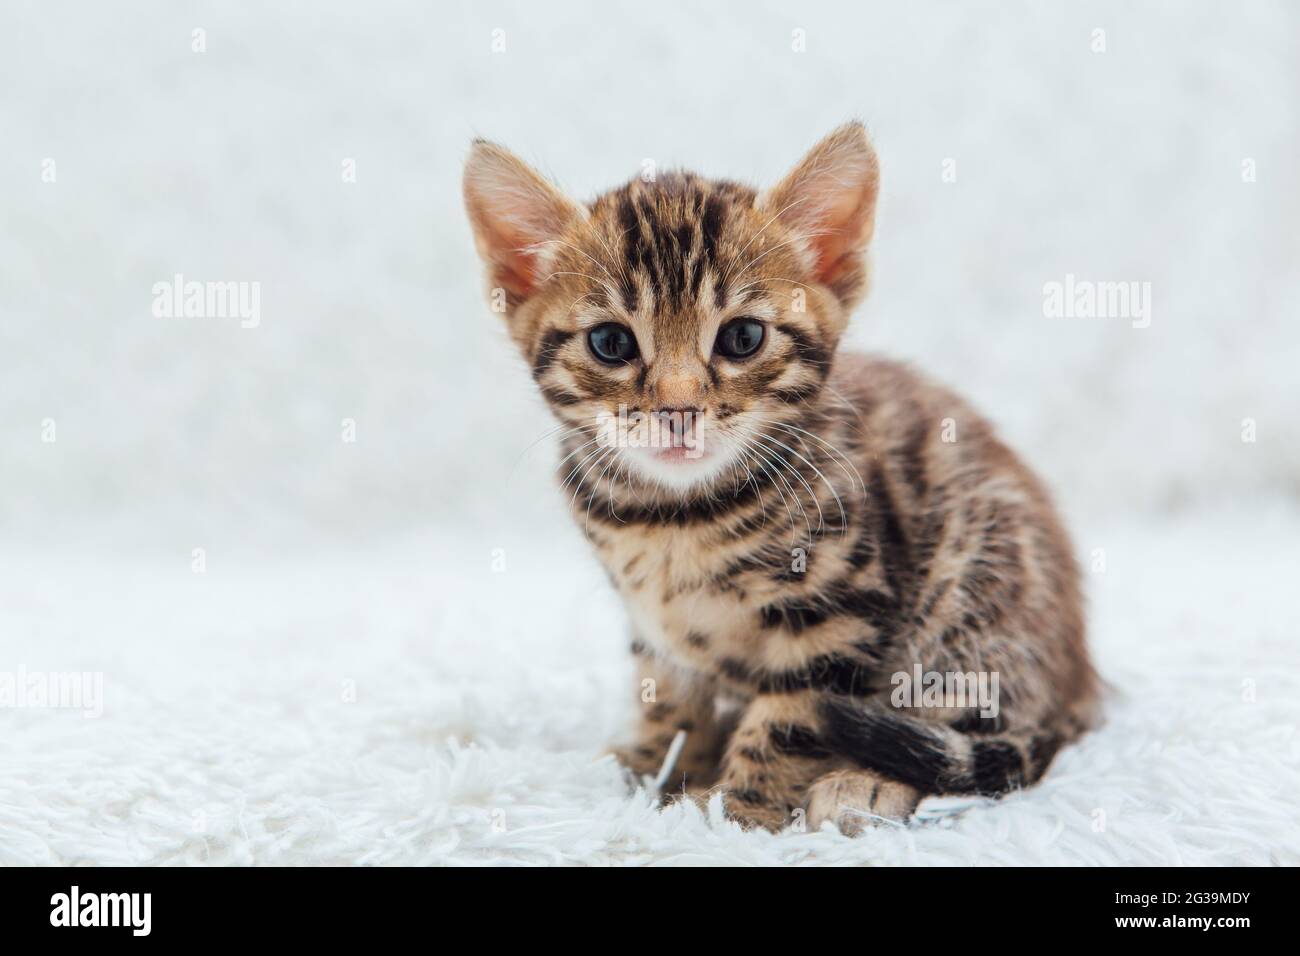 Cute bengal one month old kitten on the white fury blanket close-up. Stock Photo